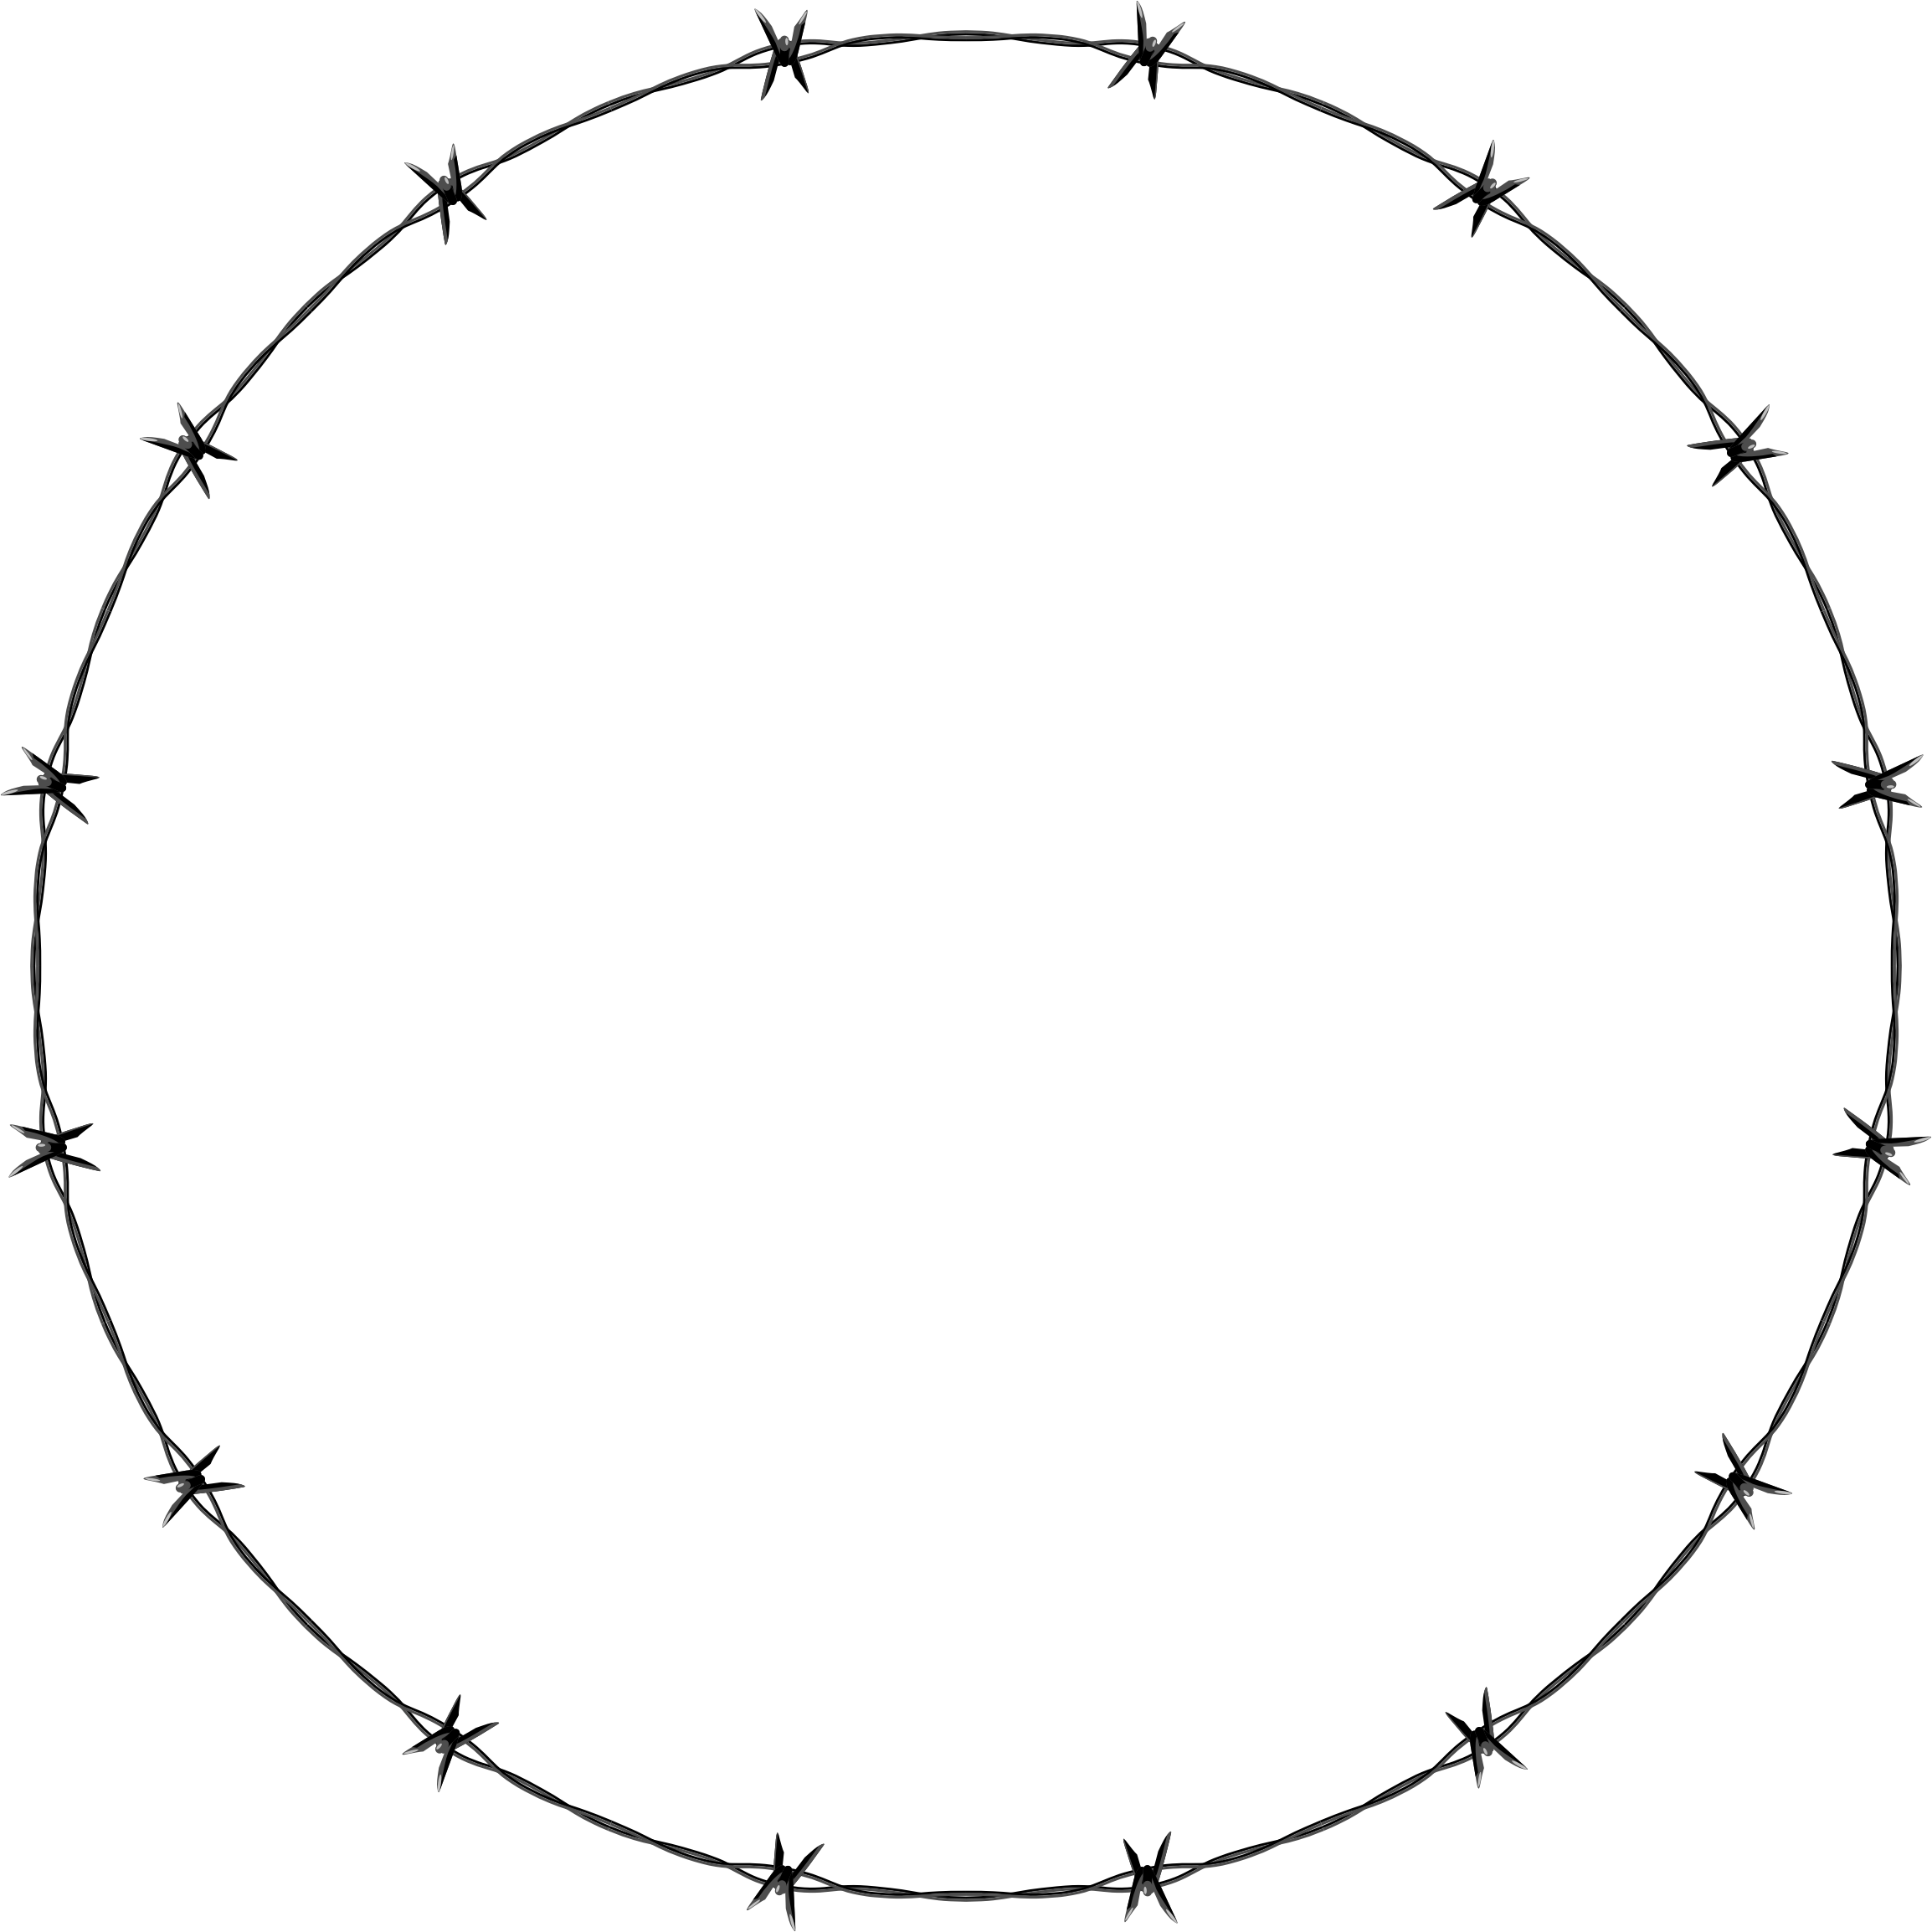 Barbed wire border big. Clipart frame circle